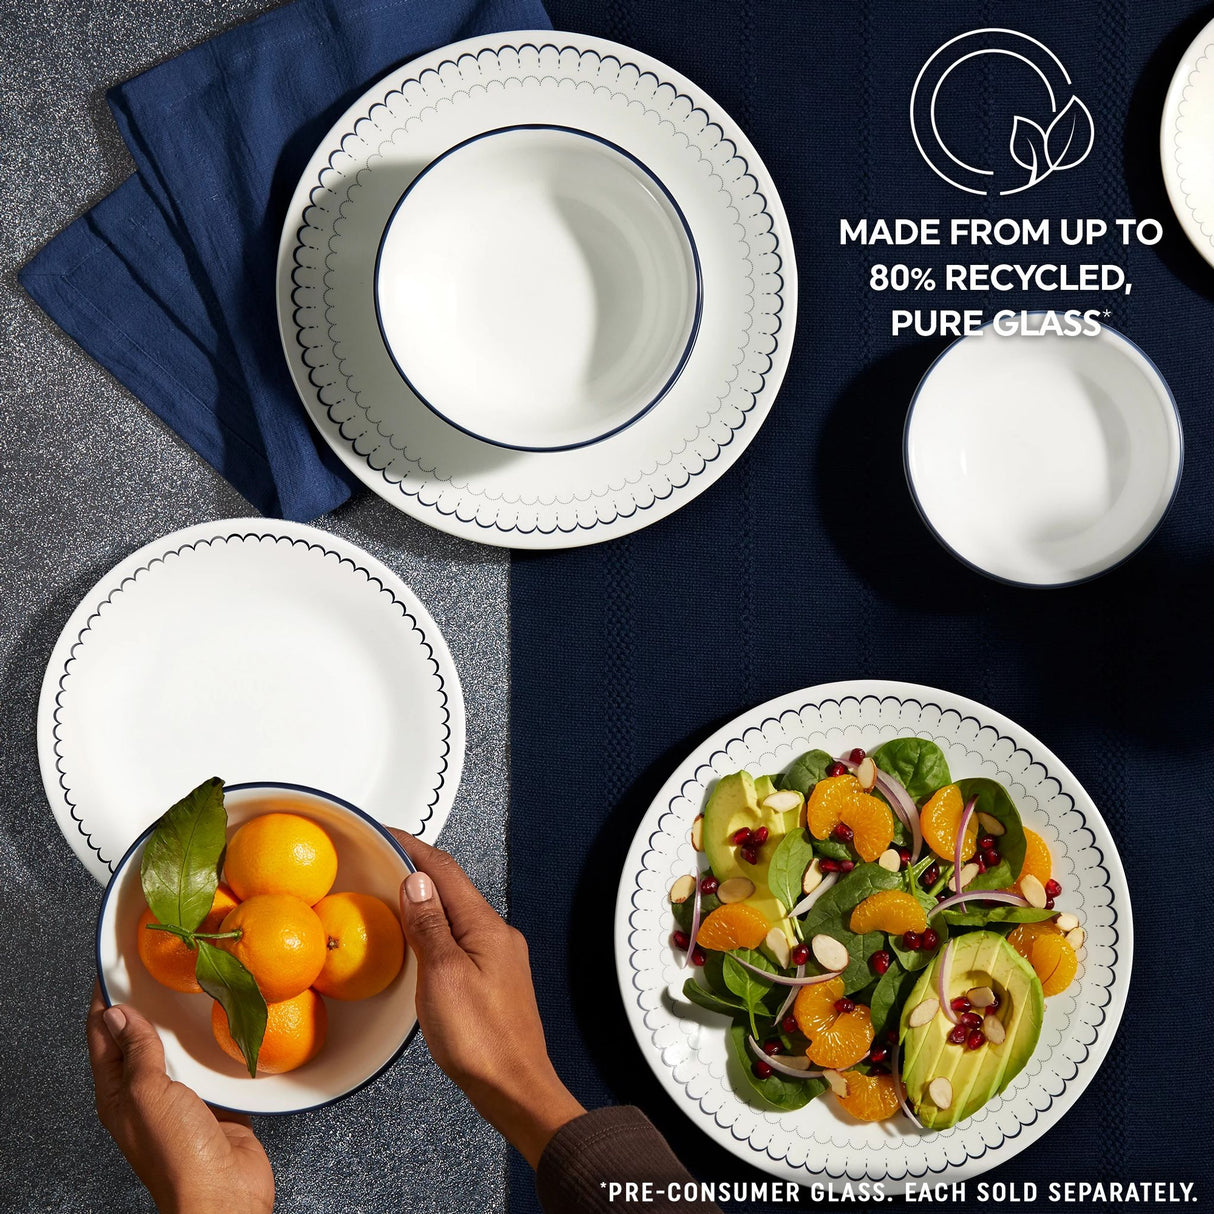  Caspian Lace Dinnerware on tabletop with text made from up to 80% recycled pure glass